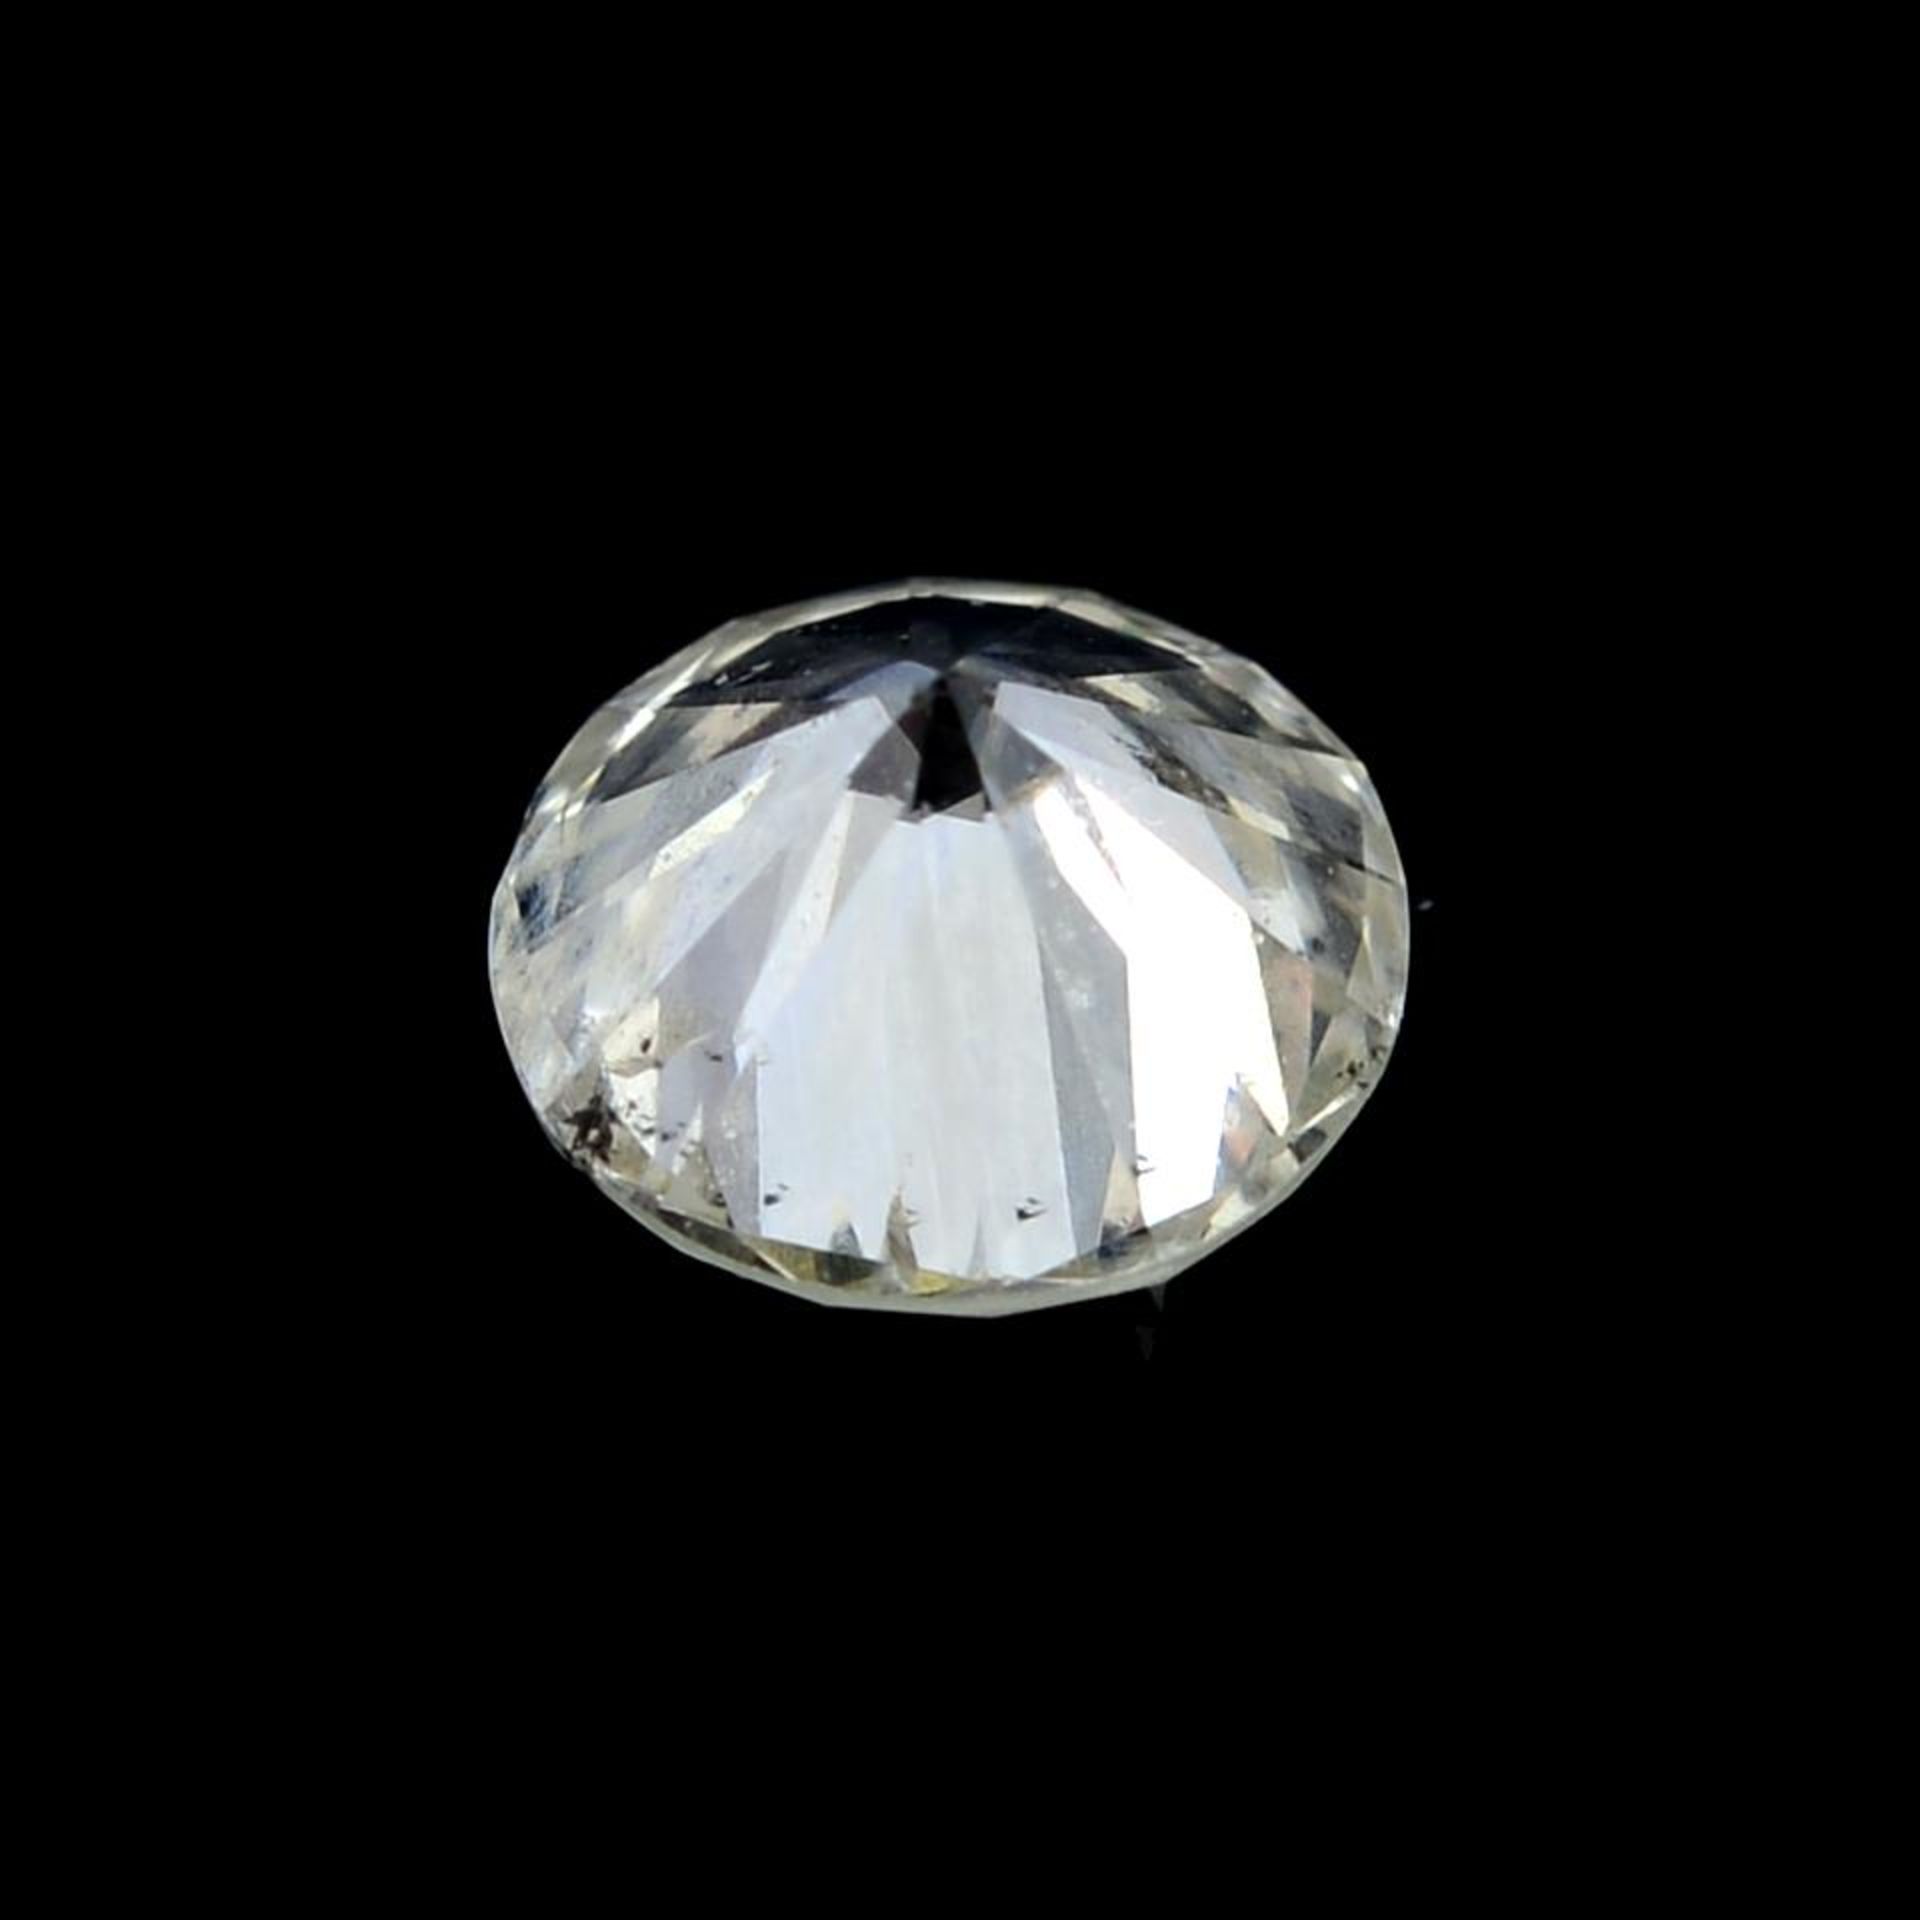 A brilliant cut diamond weighing 0.25ct. - Image 2 of 2